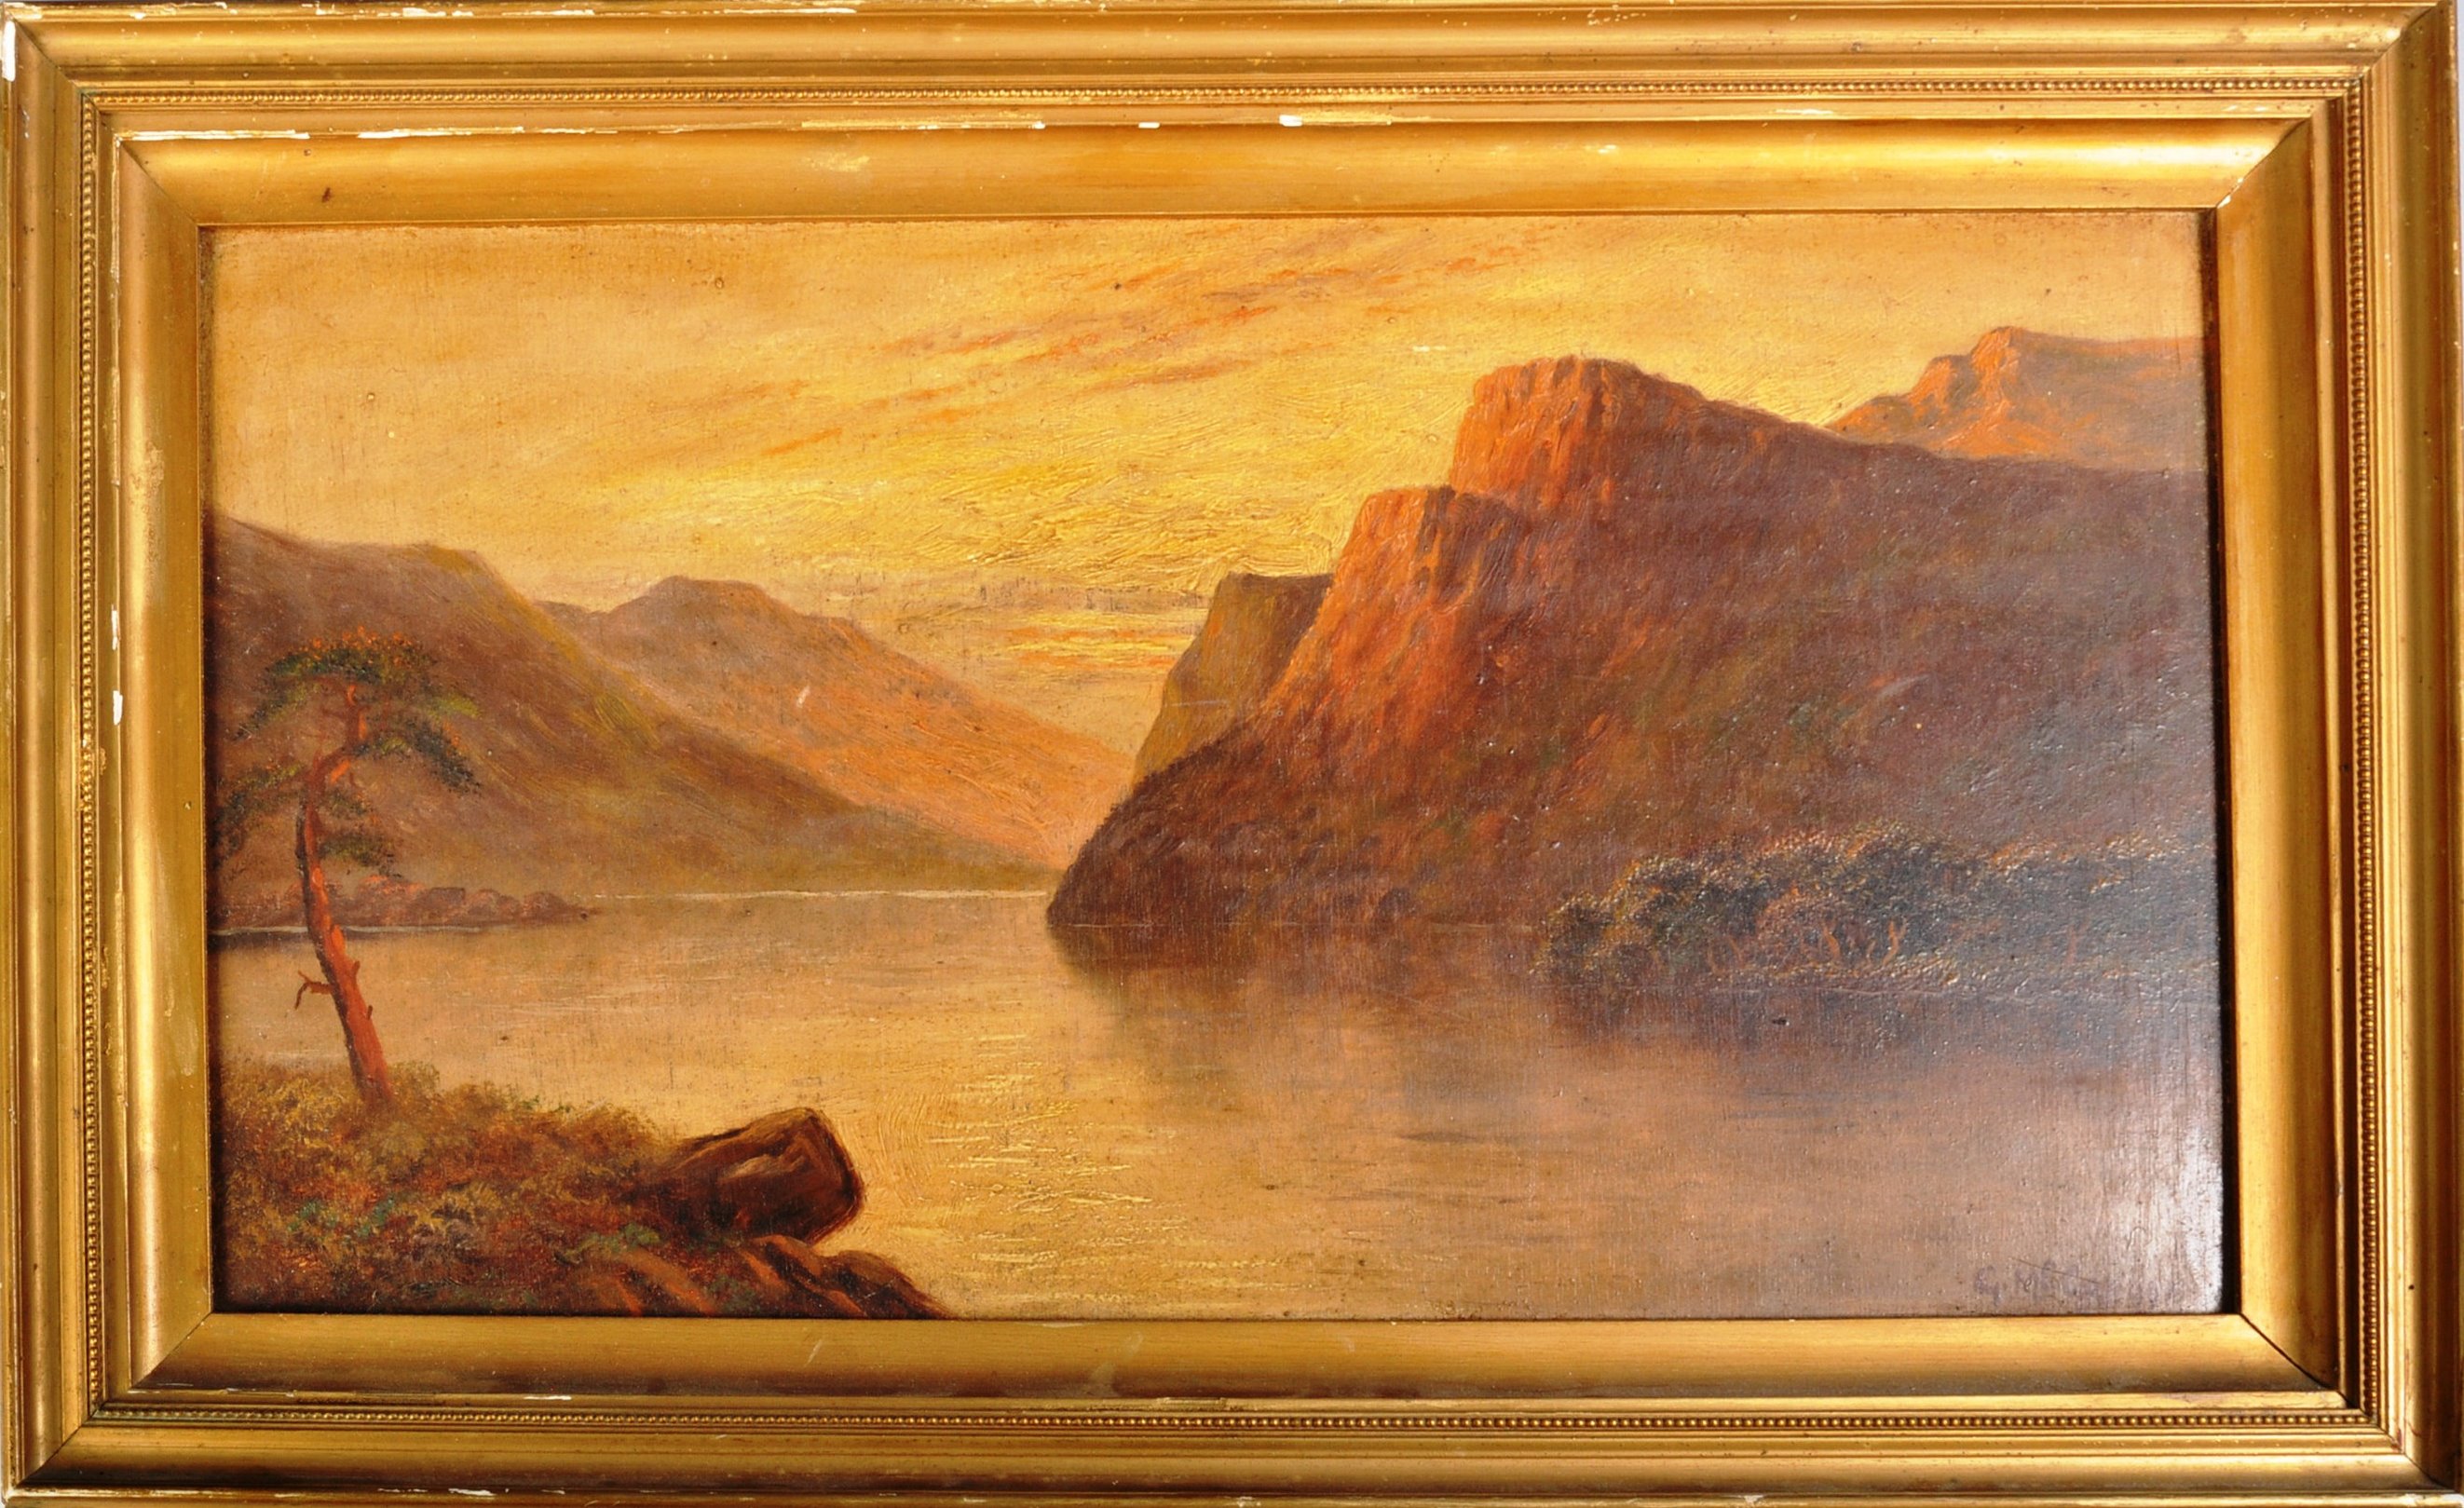 EARLY 20TH CENTURY OIL ON BOARD LANDSCAPE PAINTING